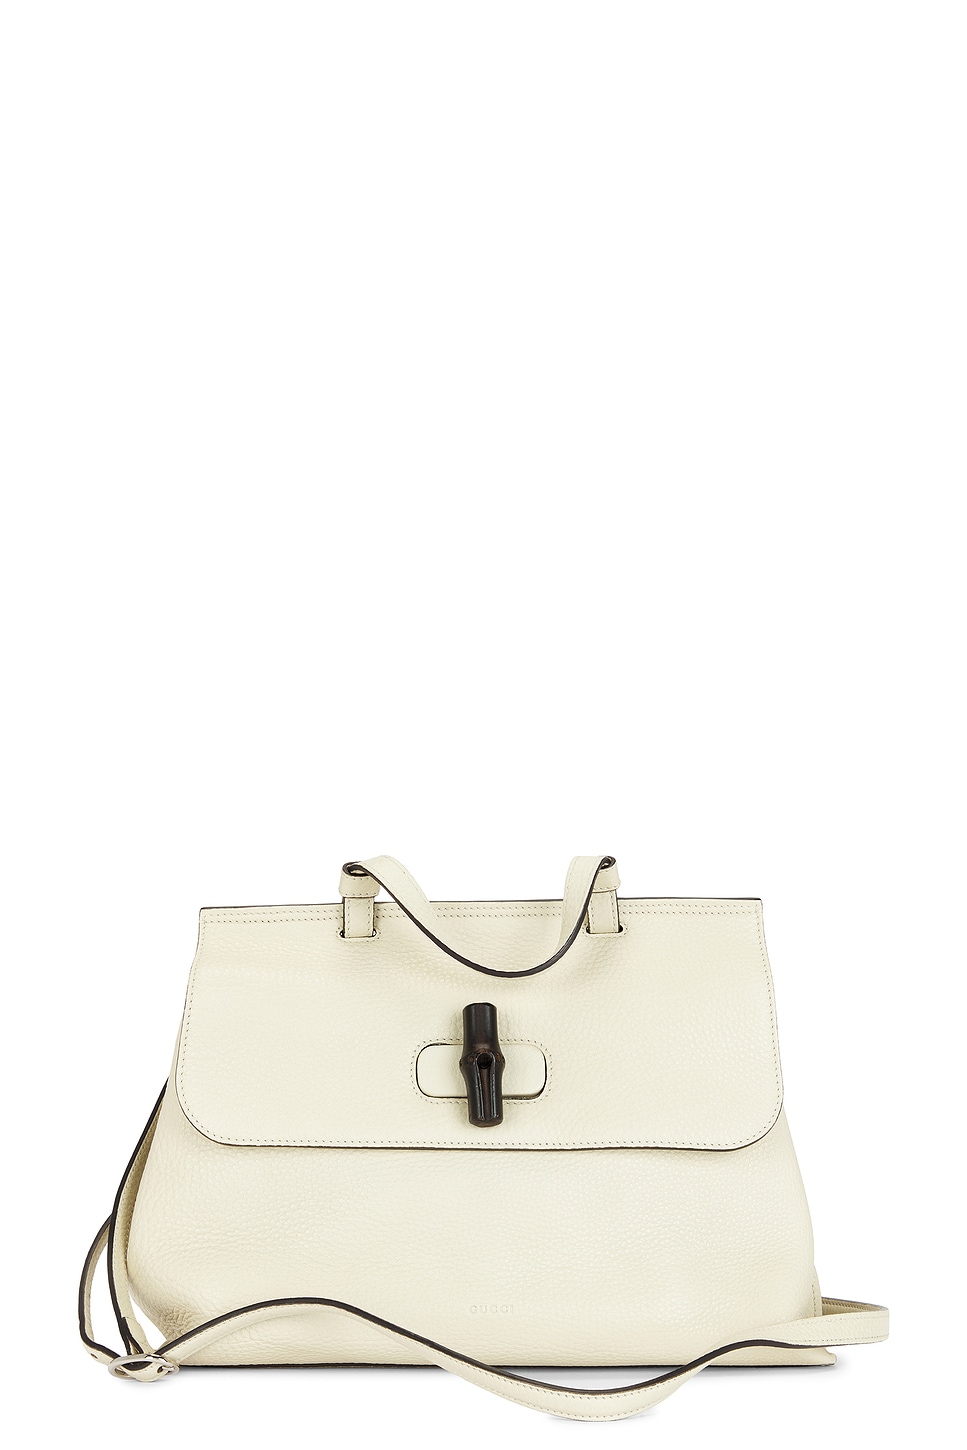 Gucci Bamboo Leather 2 Way Handbag In White